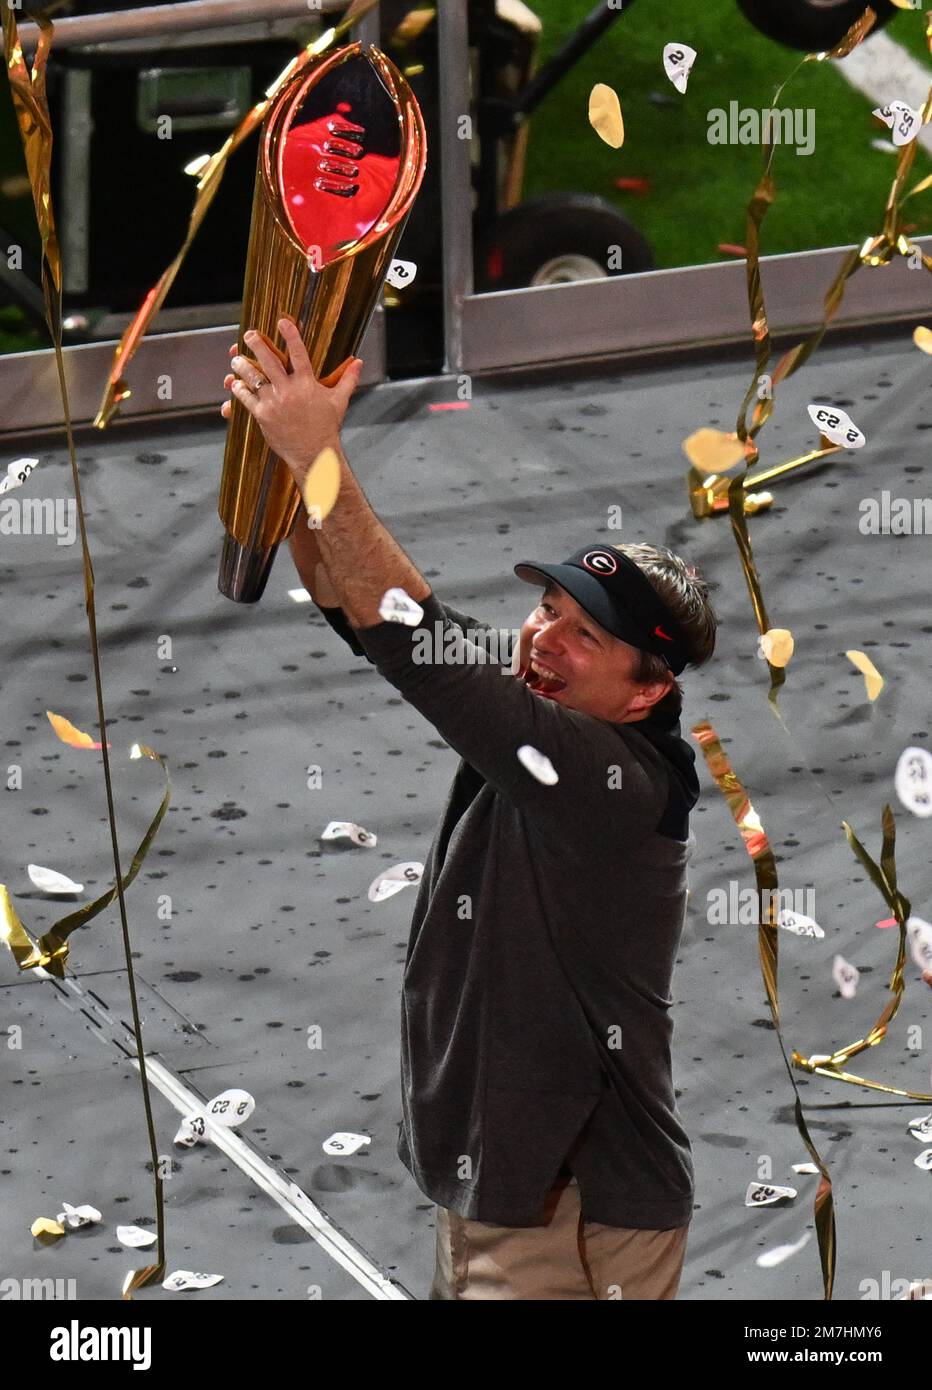 Inglewood, United States. 09th Jan, 2023. Georgia head coach Kirby Smart raises the National College Football Championship Trophy after the Bulldogs defeated the TCU Horned Frogs 65-7 in the 2023 NCAA College Football National Championship at SoFi Stadium in Inglewood, California, on Monday, January 9, 2023. Photo by Jon SooHoo/UPI Credit: UPI/Alamy Live News Stock Photo